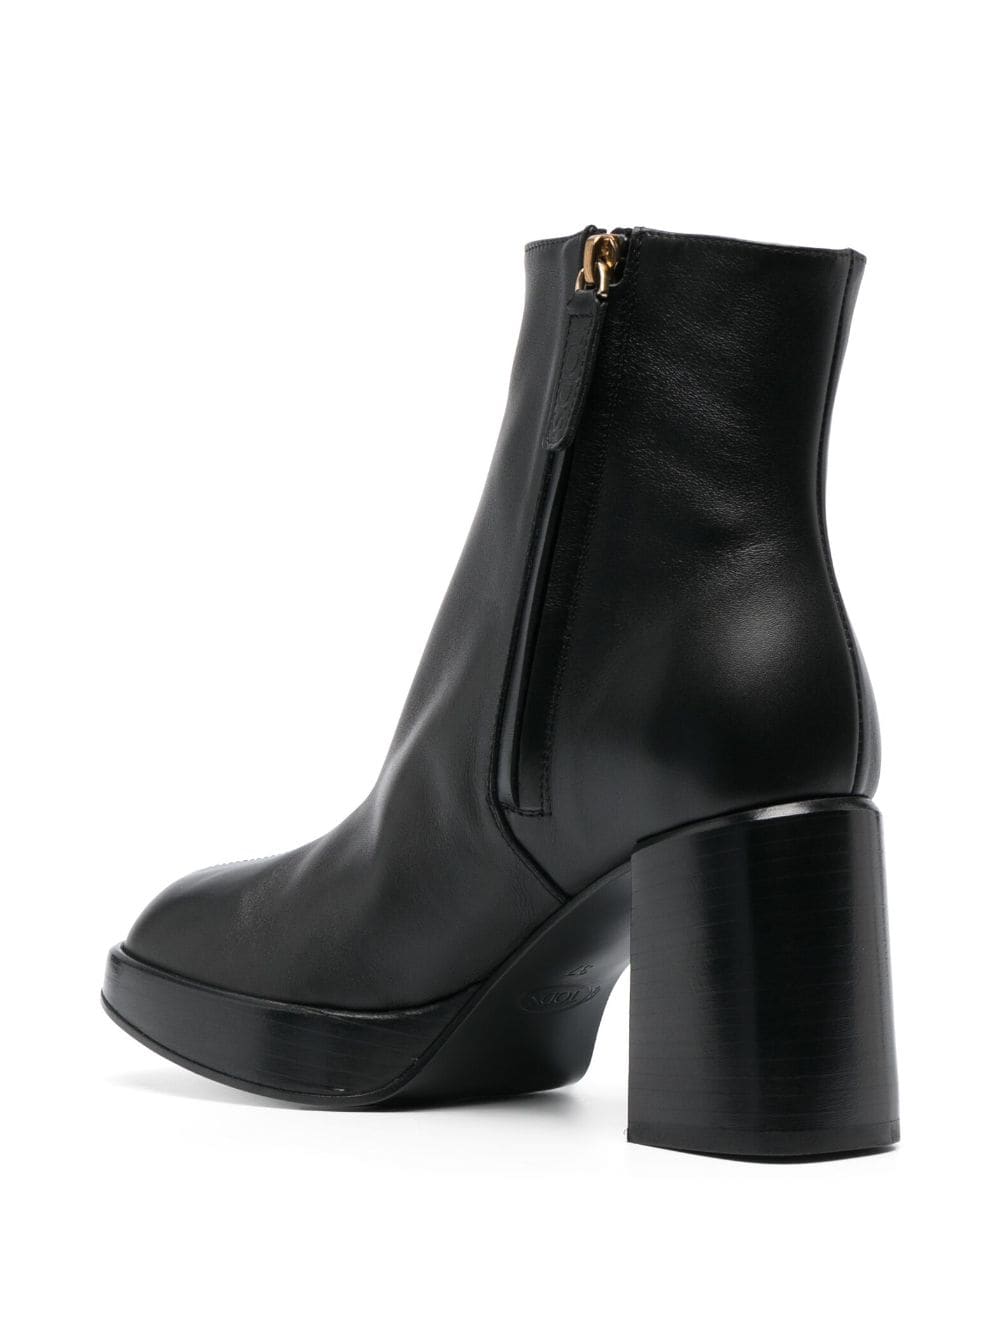 Statement-Making Leather Square-Toe Boots for Women - FW23